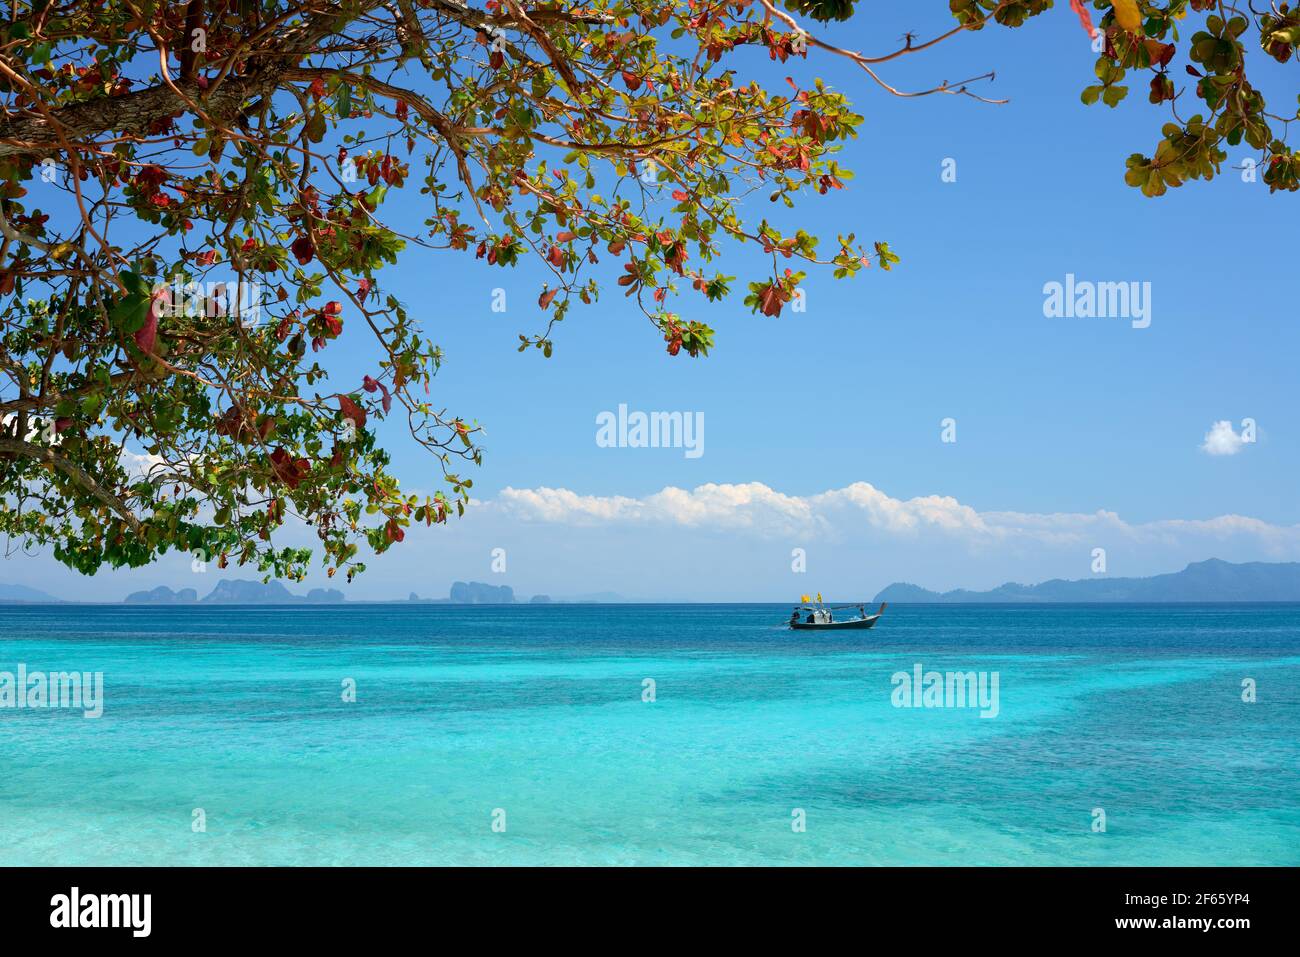 Sea background. Tropical island nature. Vacation travel destination, summer concept Stock Photo